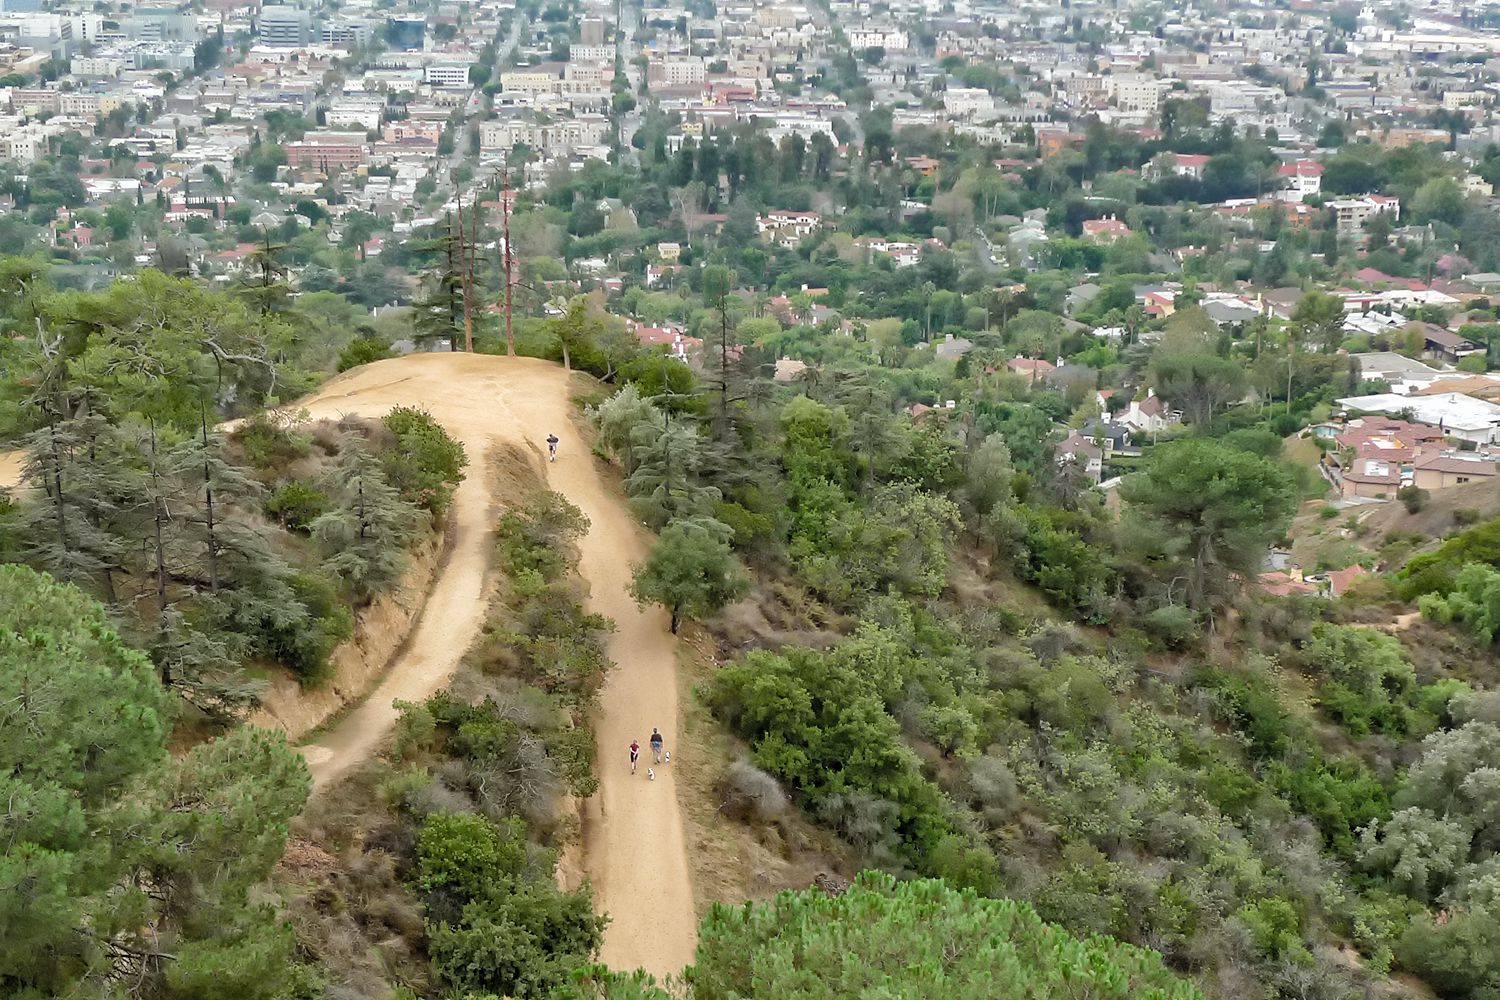 Ideas for a Hike in Griffith Park Los Angeles